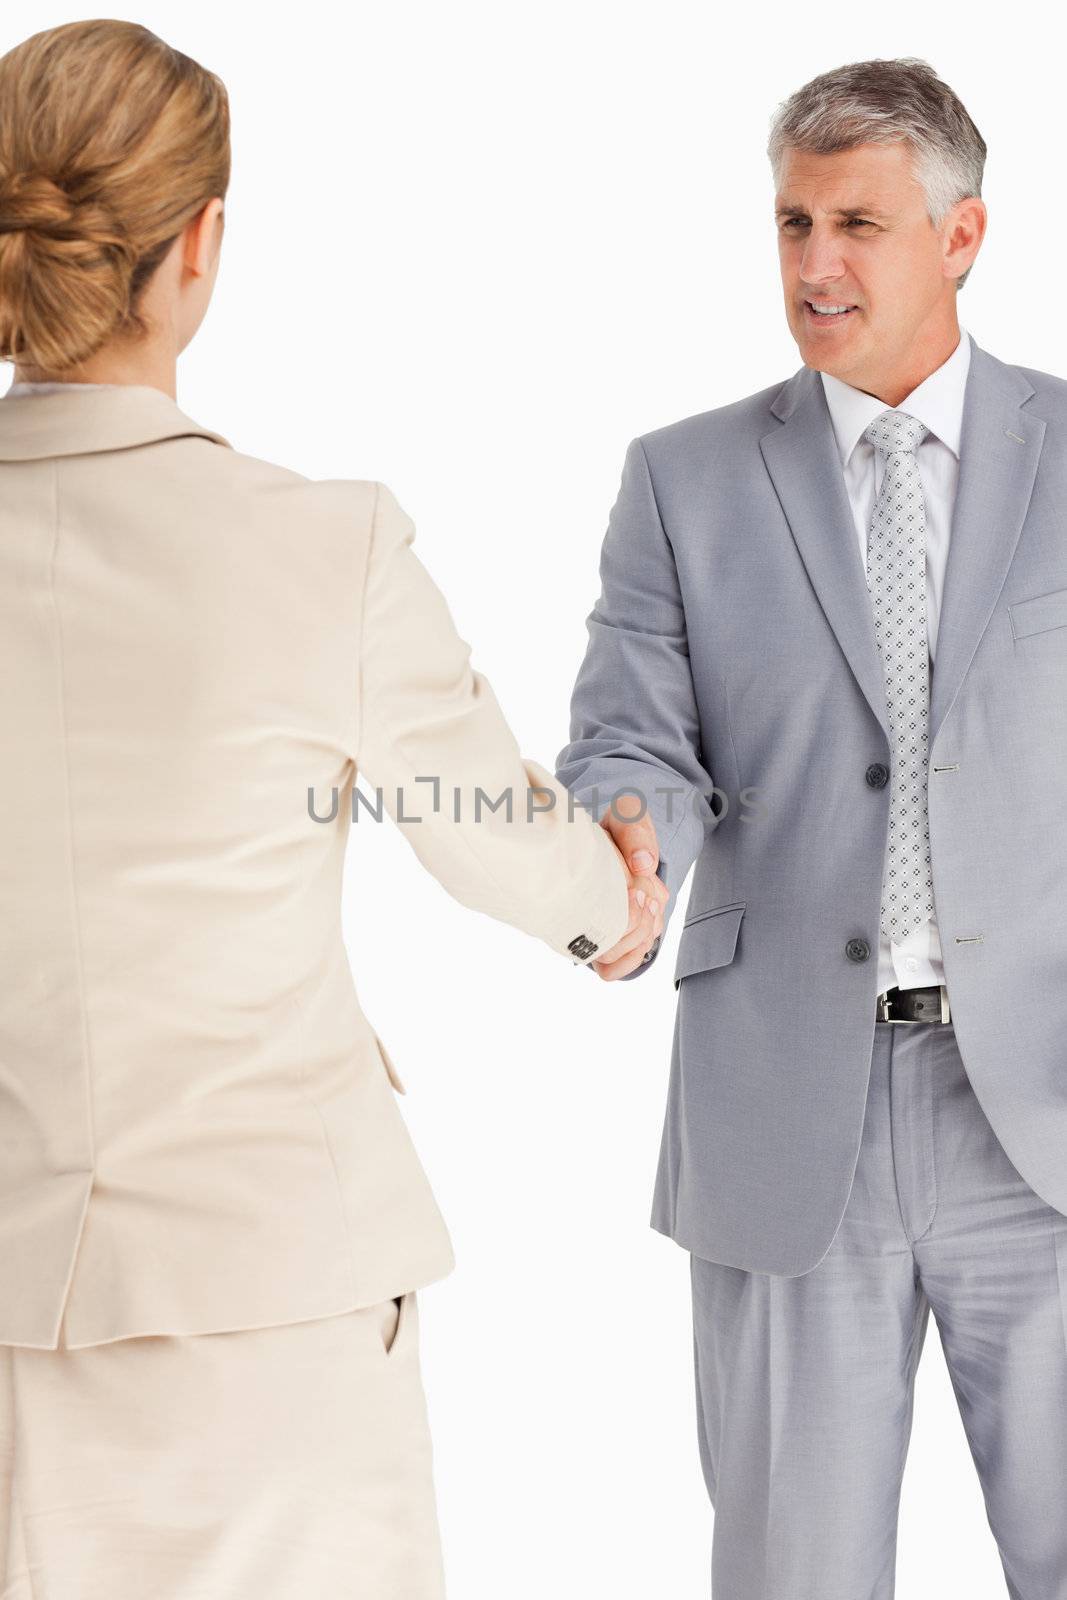 Business people having an agreement against white background